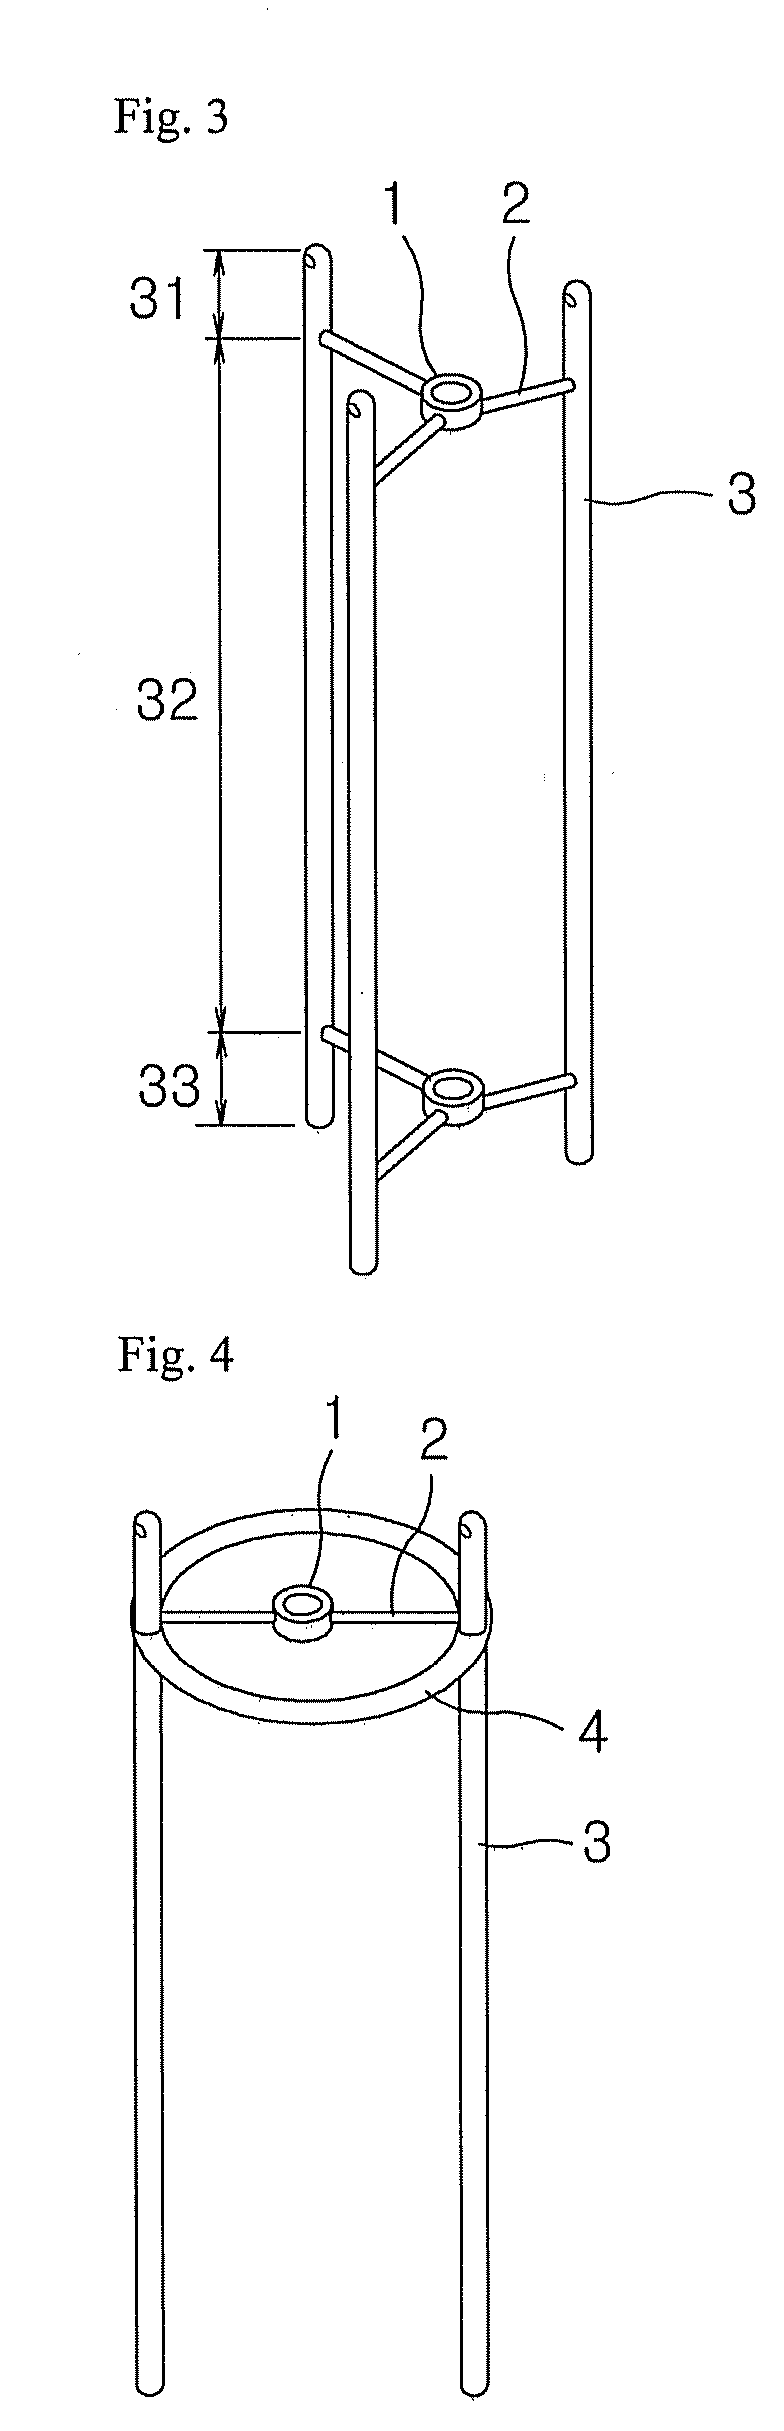 Device and method for measuring temperature in a tubular fixed-bed reactor